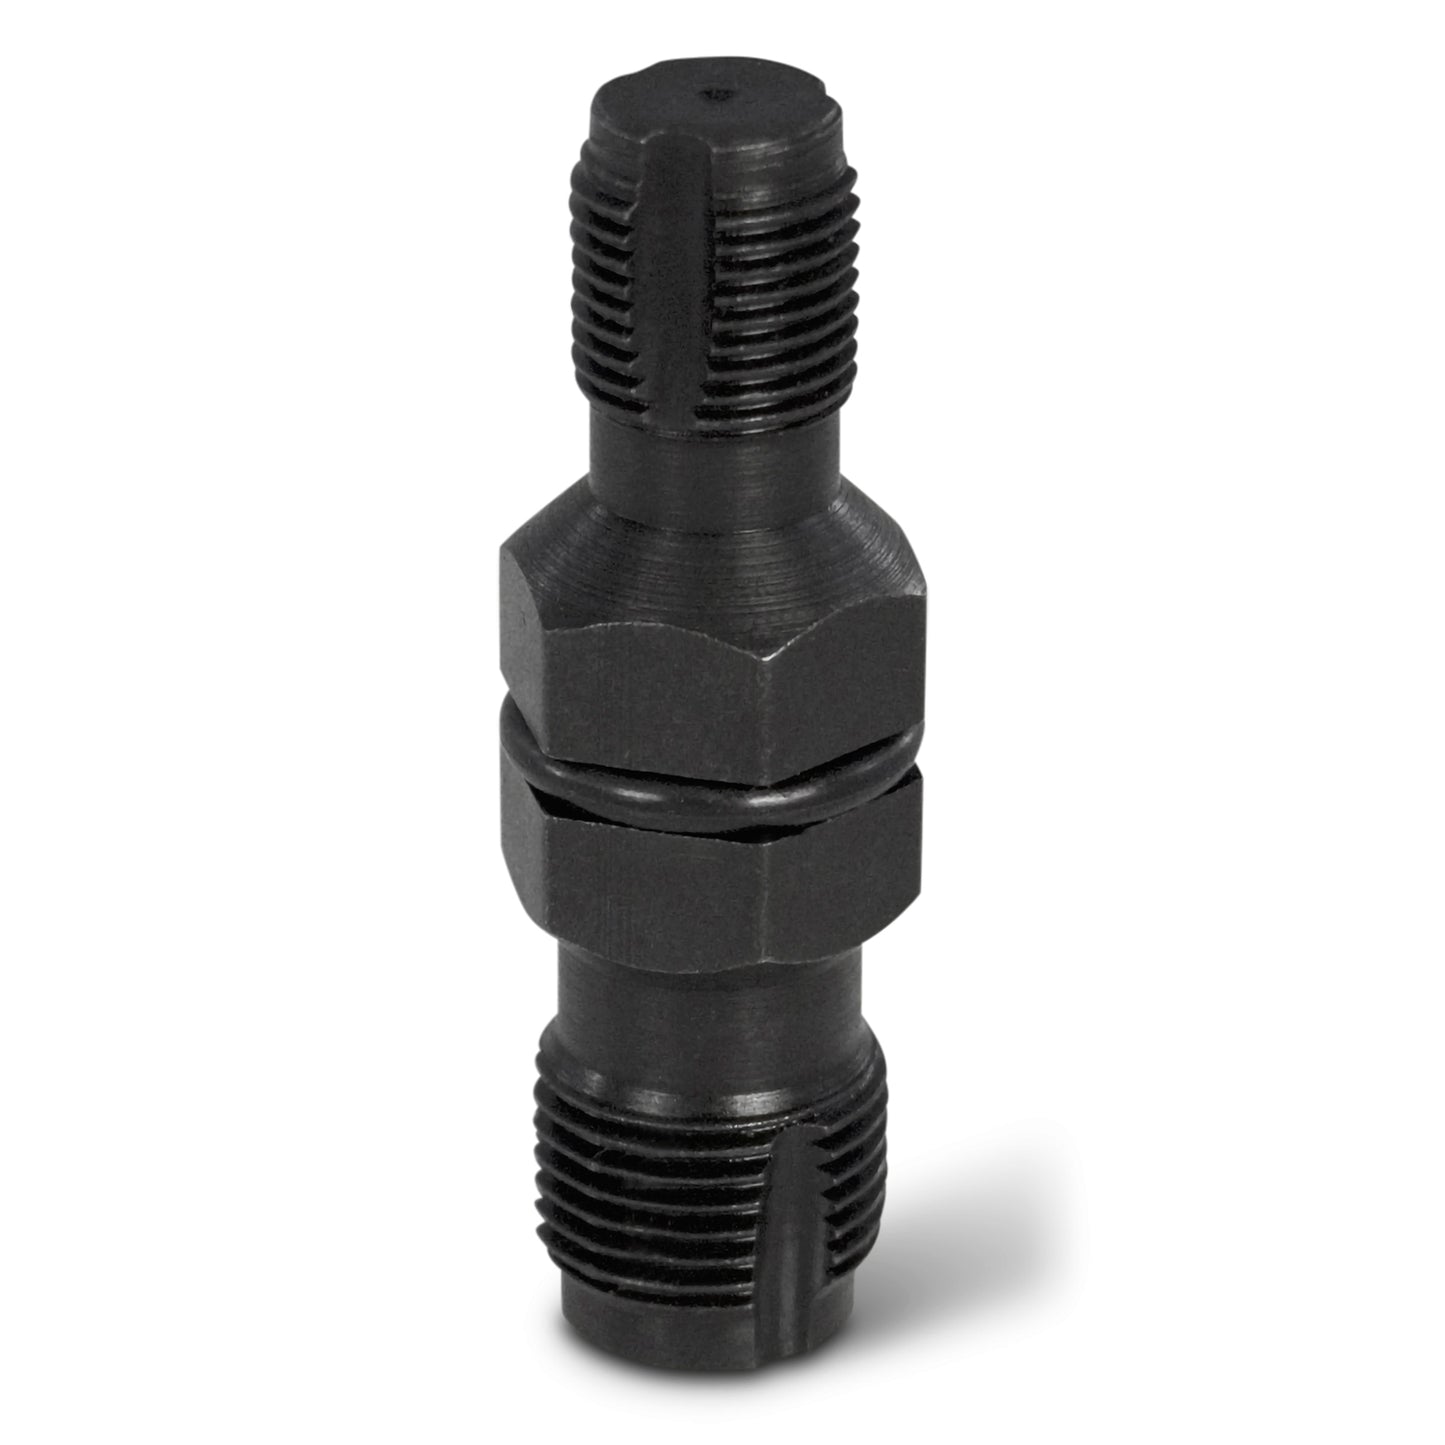 Proform Spark Plug Thread Chaser Tool; Fits 14mm and 18mm Threads; Steel Material 66821